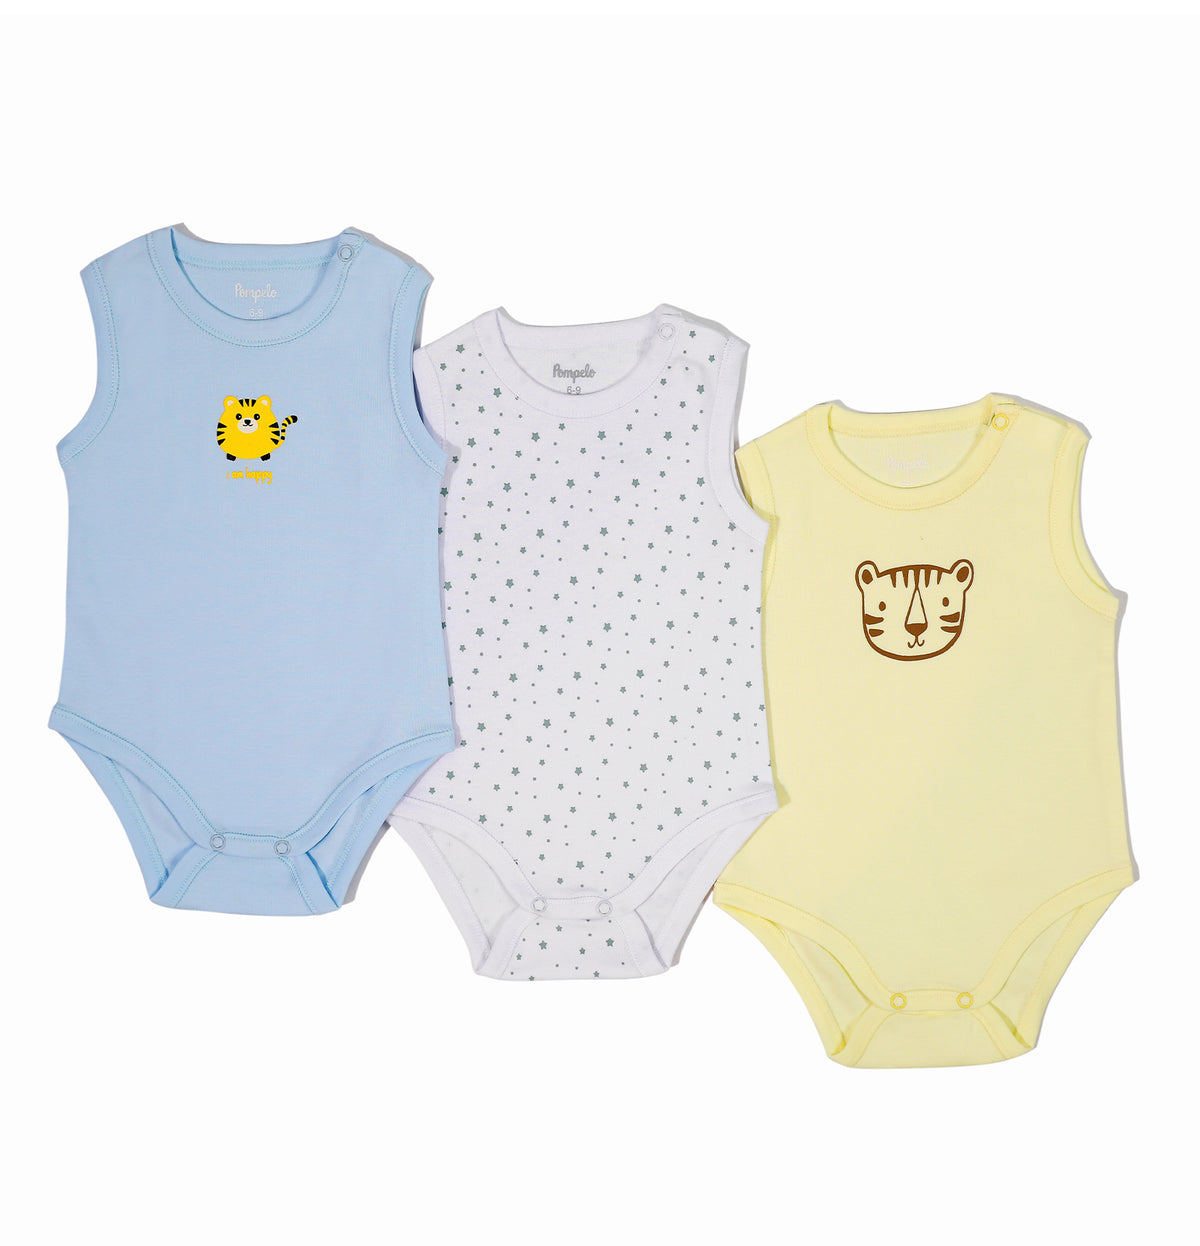 Fun printed set of 3 sleeveless jumpsuits for baby boys by Pompelo